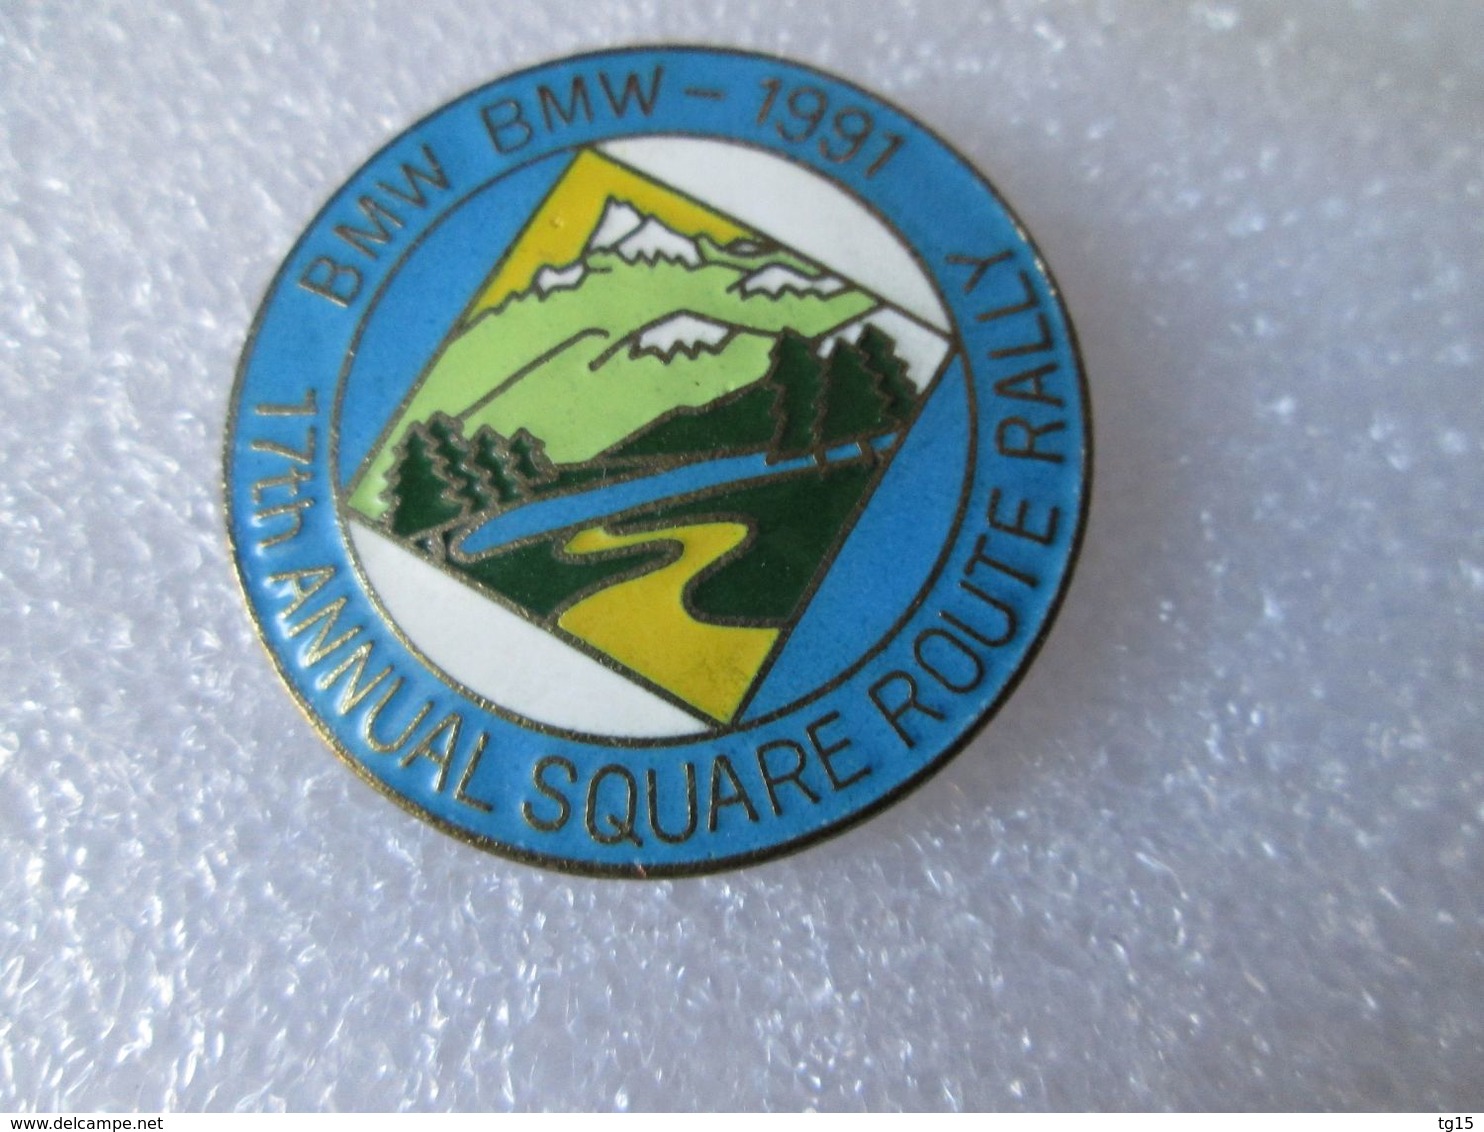 PIN'S   BMW  77 Th  ANNUAL SQUARE ROUTE RALLY  1991  32mm  Email Grand Feu - BMW